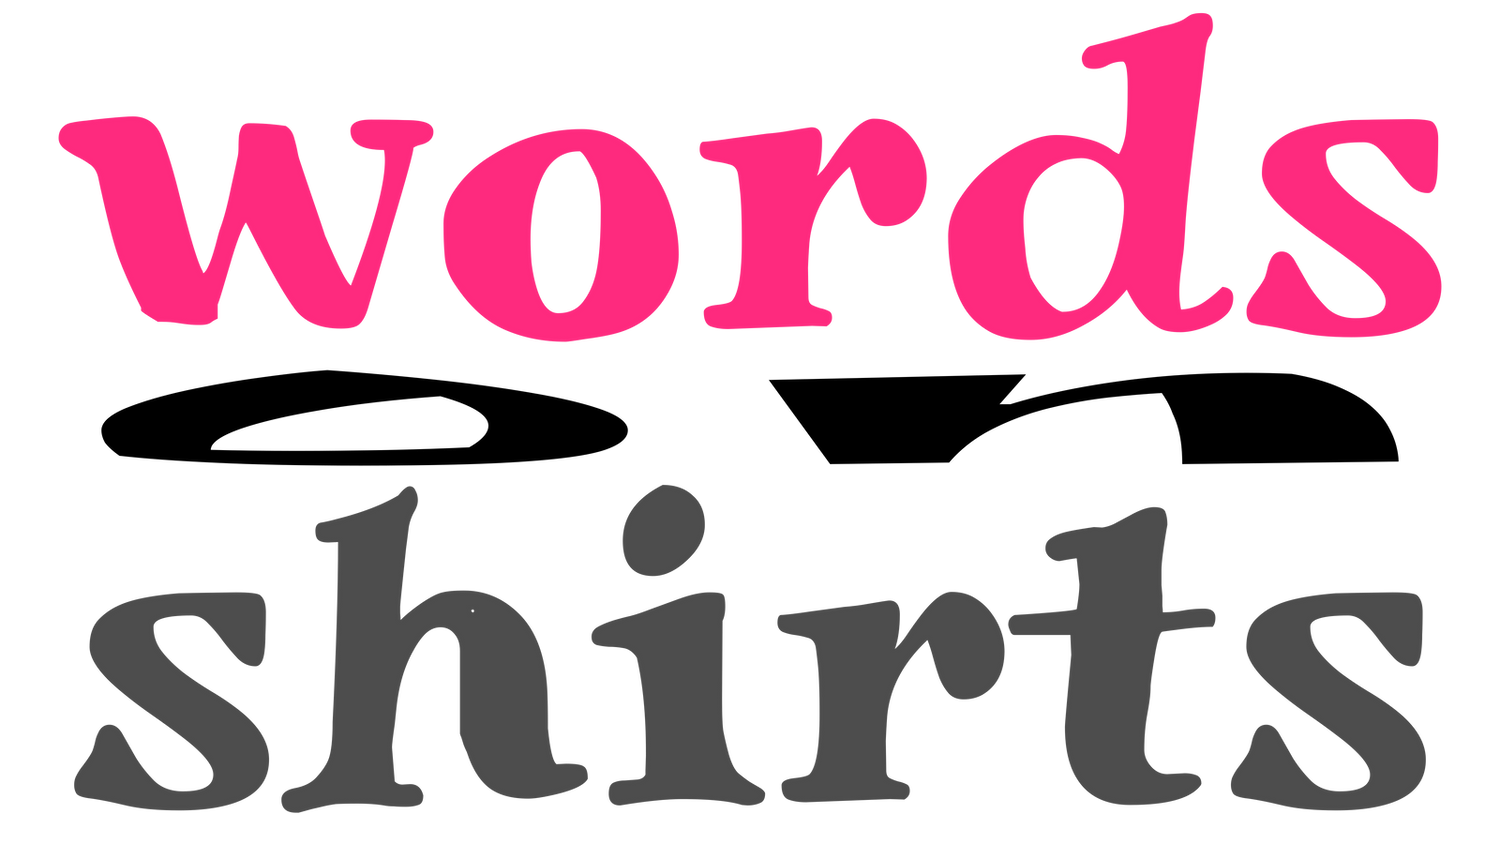 WORDS on SHIRTS